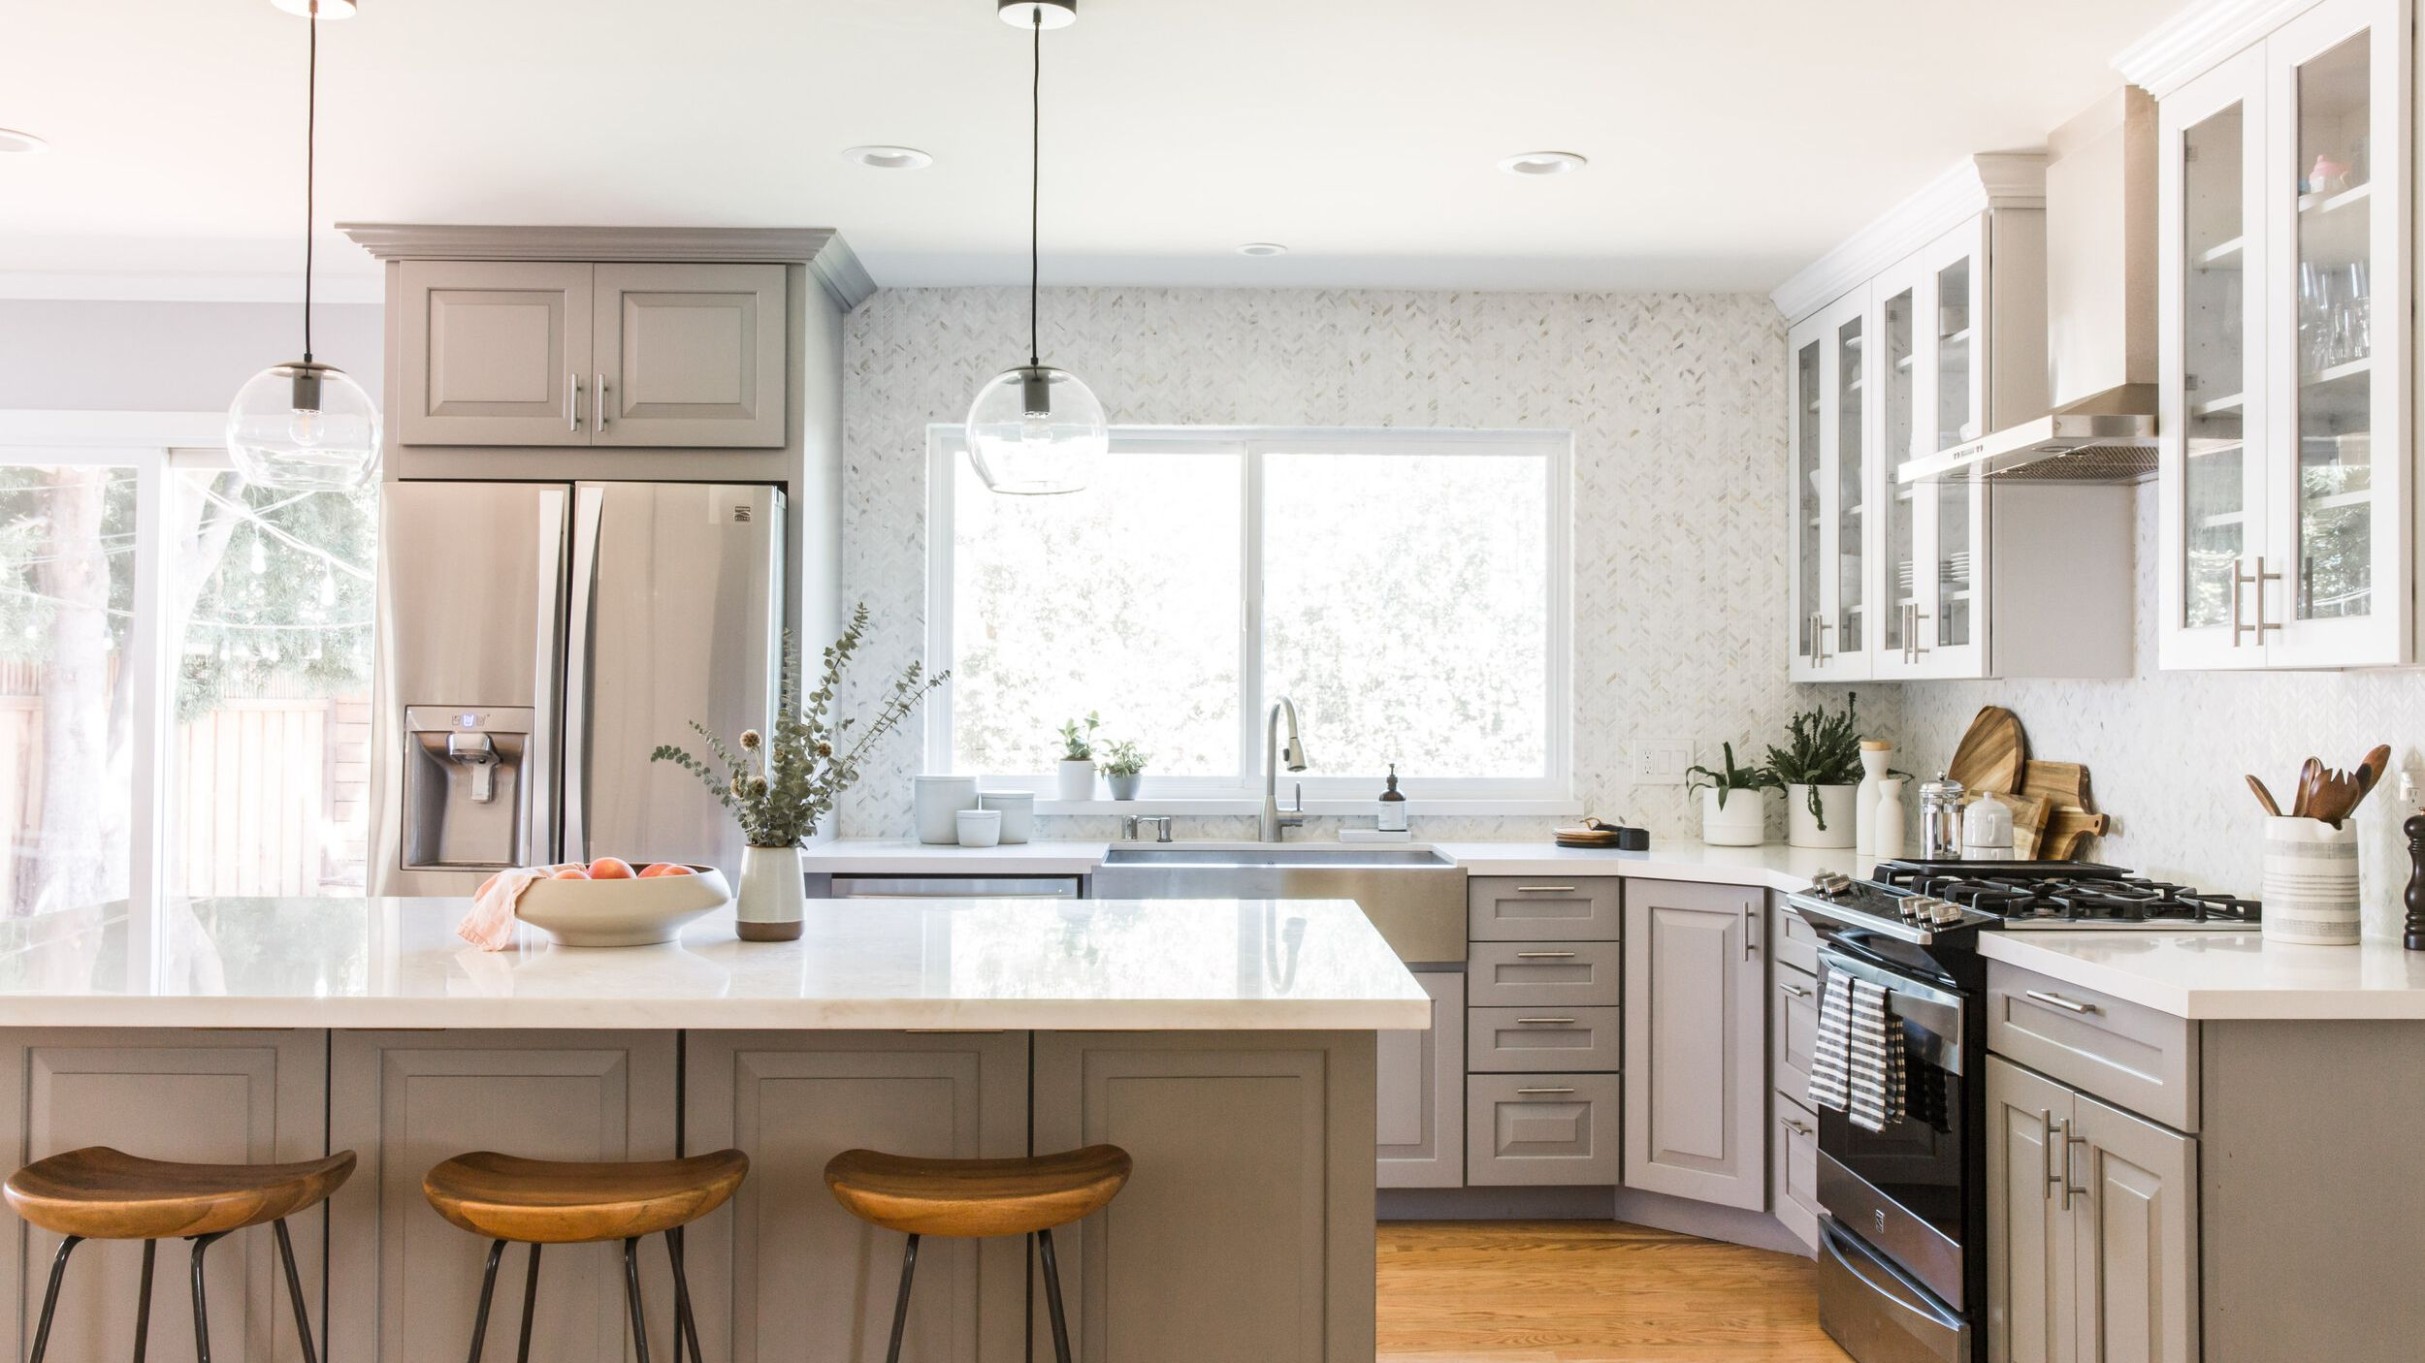 5 Gray Kitchen Cabinet Ideas That We Love - what color should i paint my kitchen with grey cabinets?